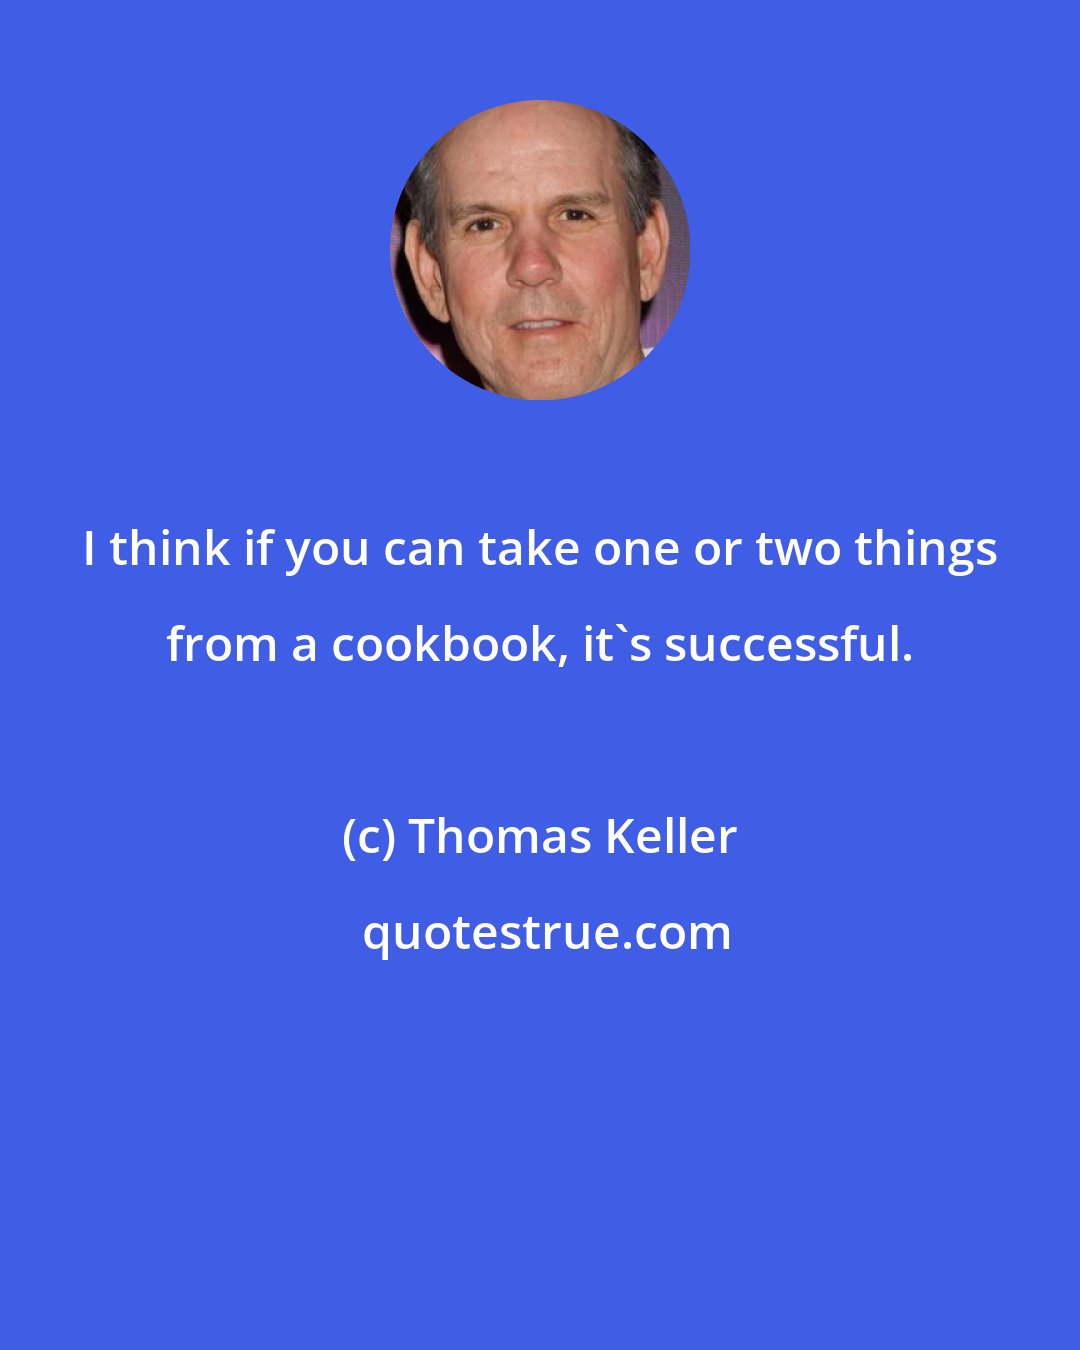 Thomas Keller: I think if you can take one or two things from a cookbook, it's successful.